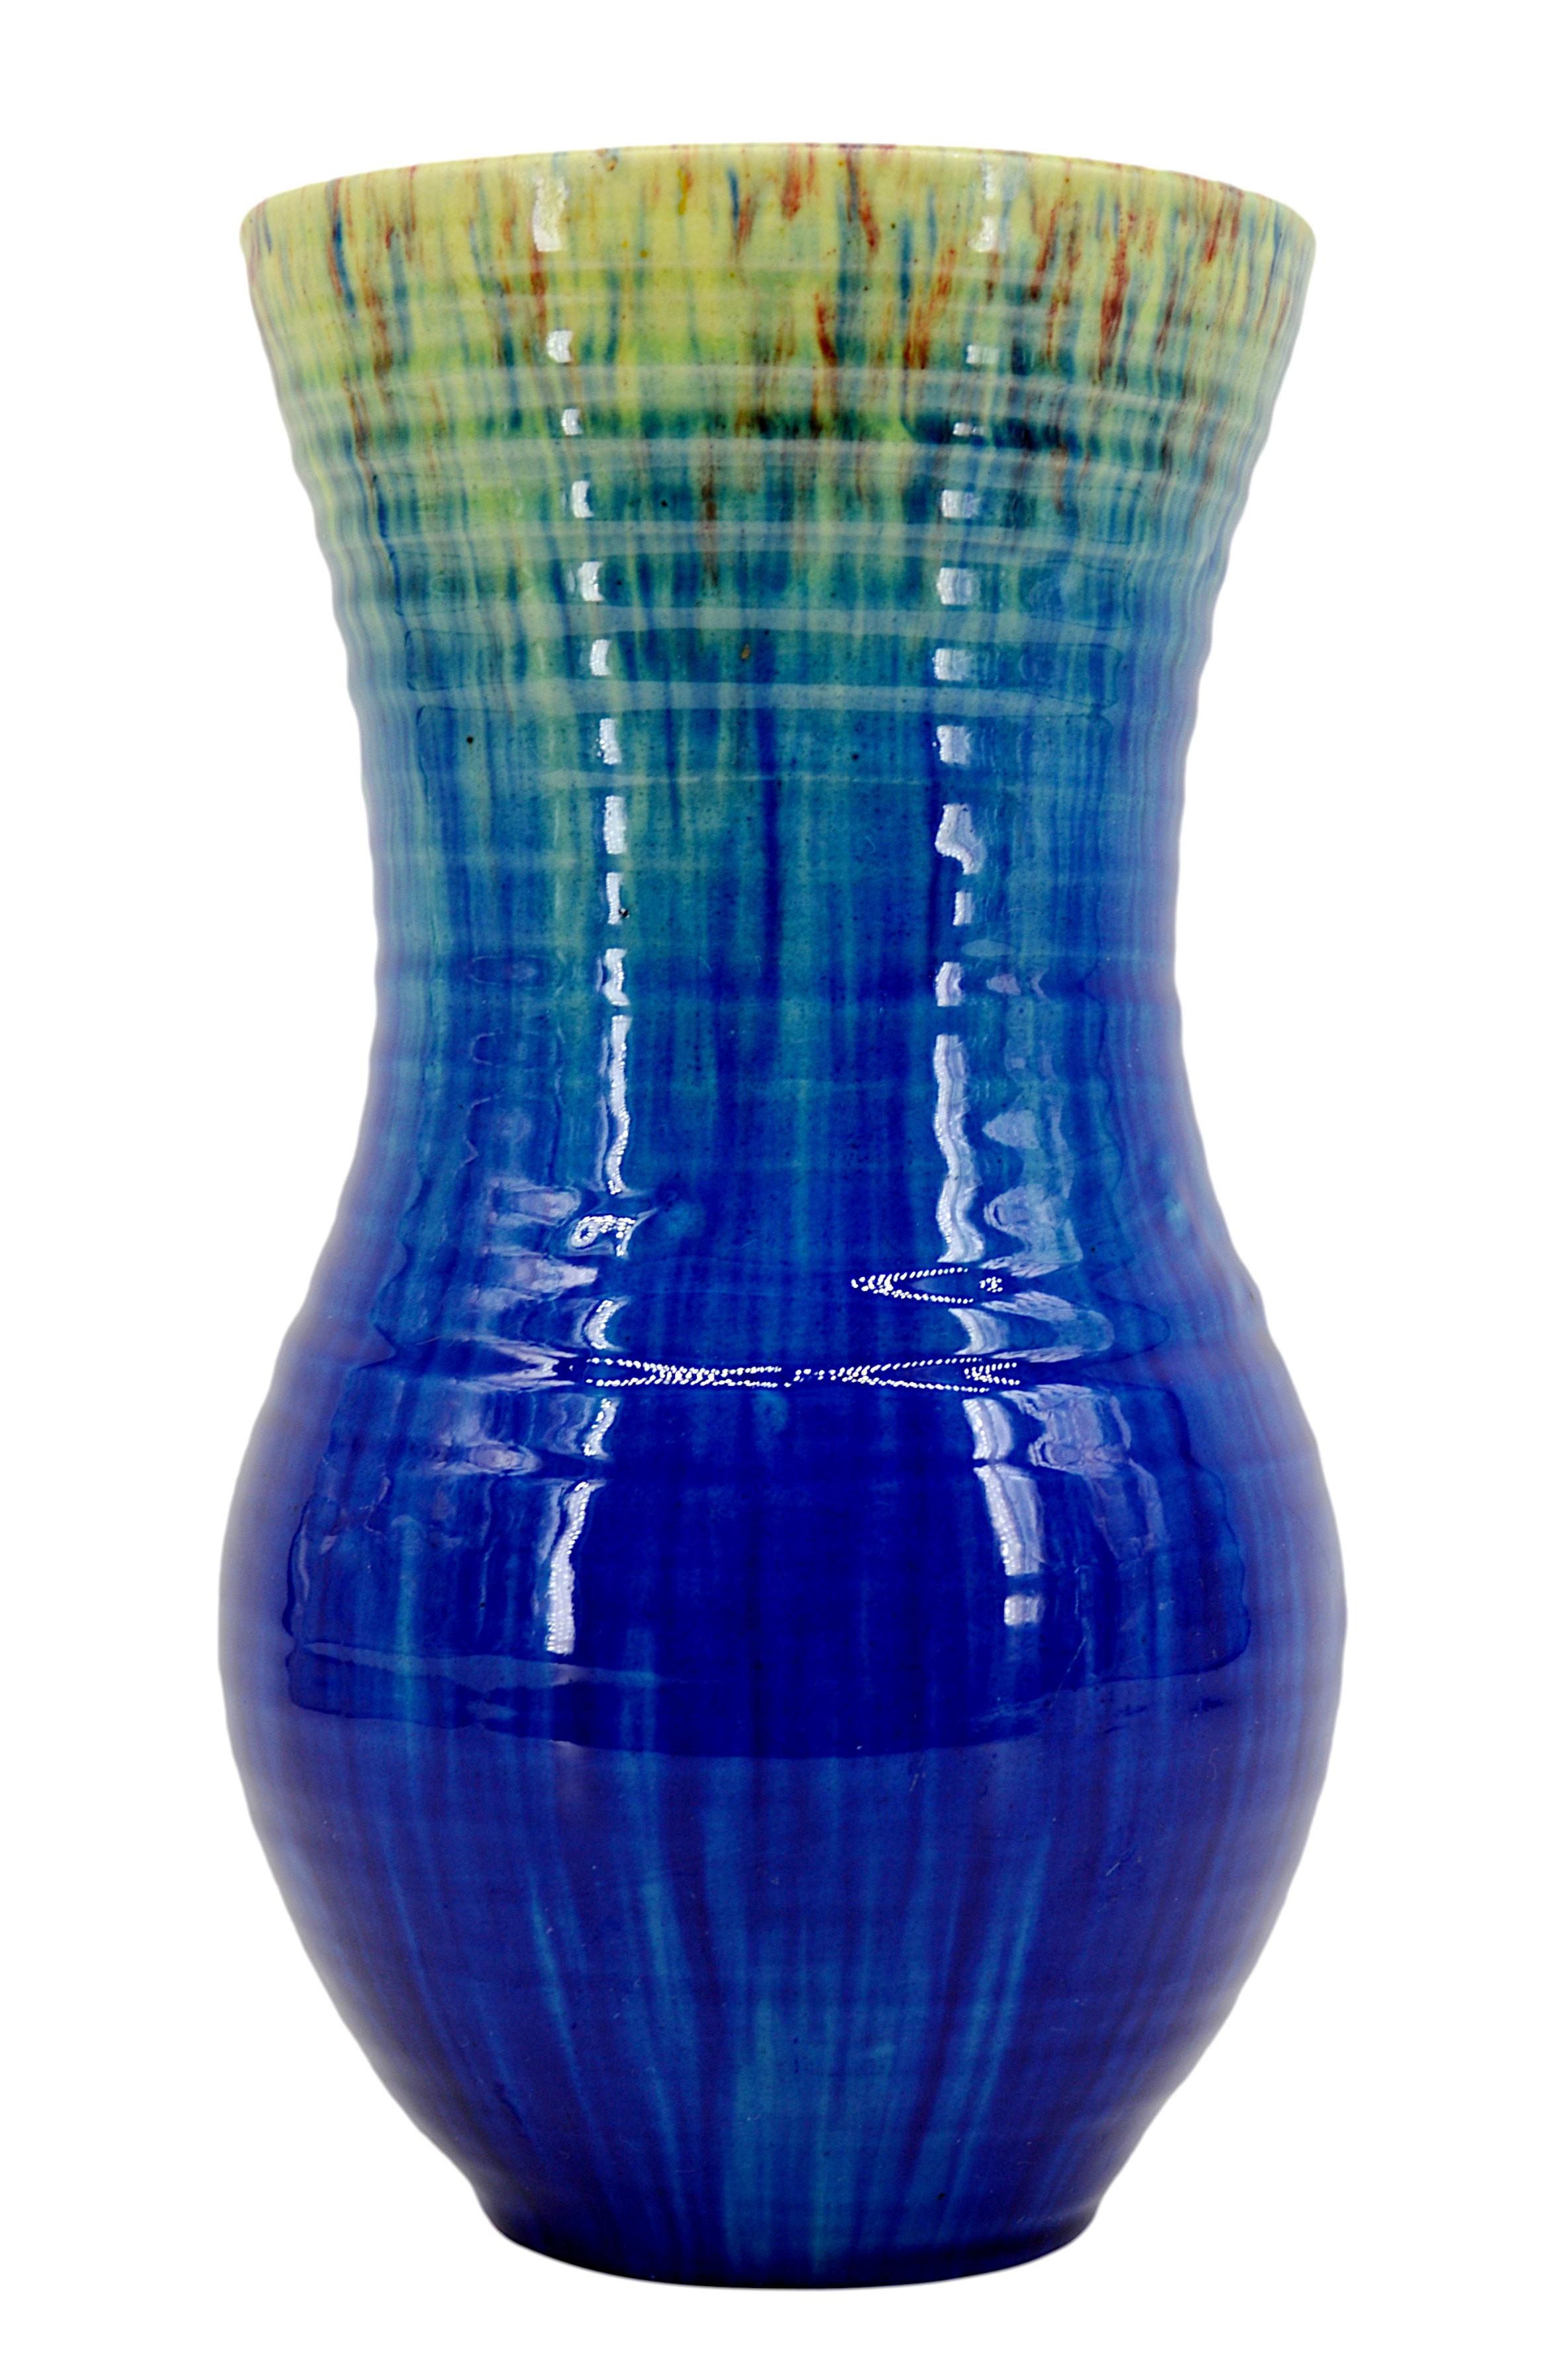 French mid-century vase by Accolay, France, 1950s. Blue, yellow (that make green in some parts) and brown vase. 
Measures: height : 28.3 cm (11.15